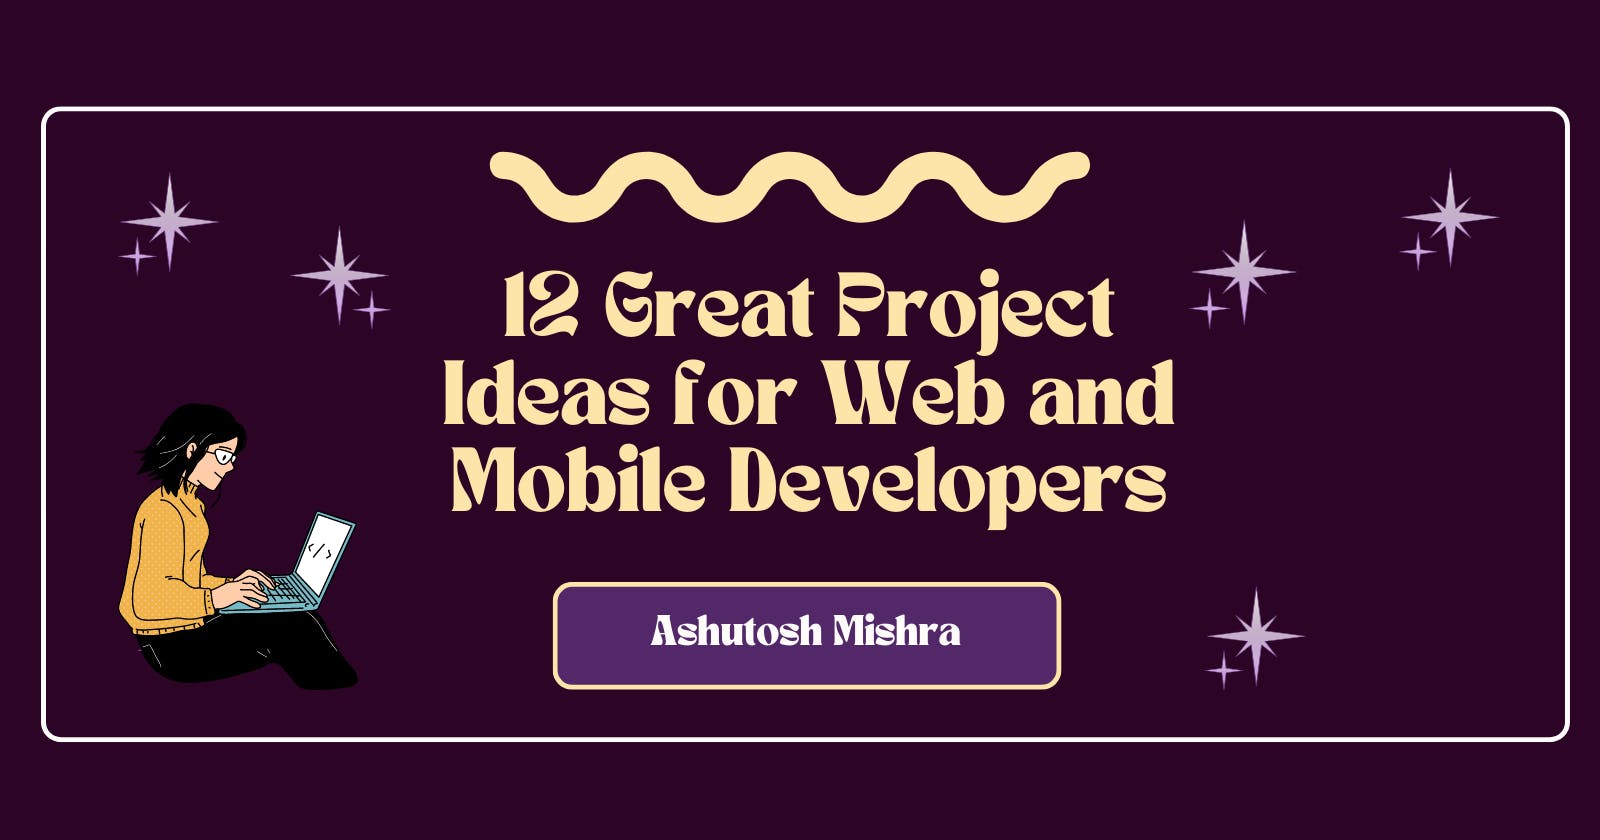 12 Great Project Ideas for Web and Mobile Developers